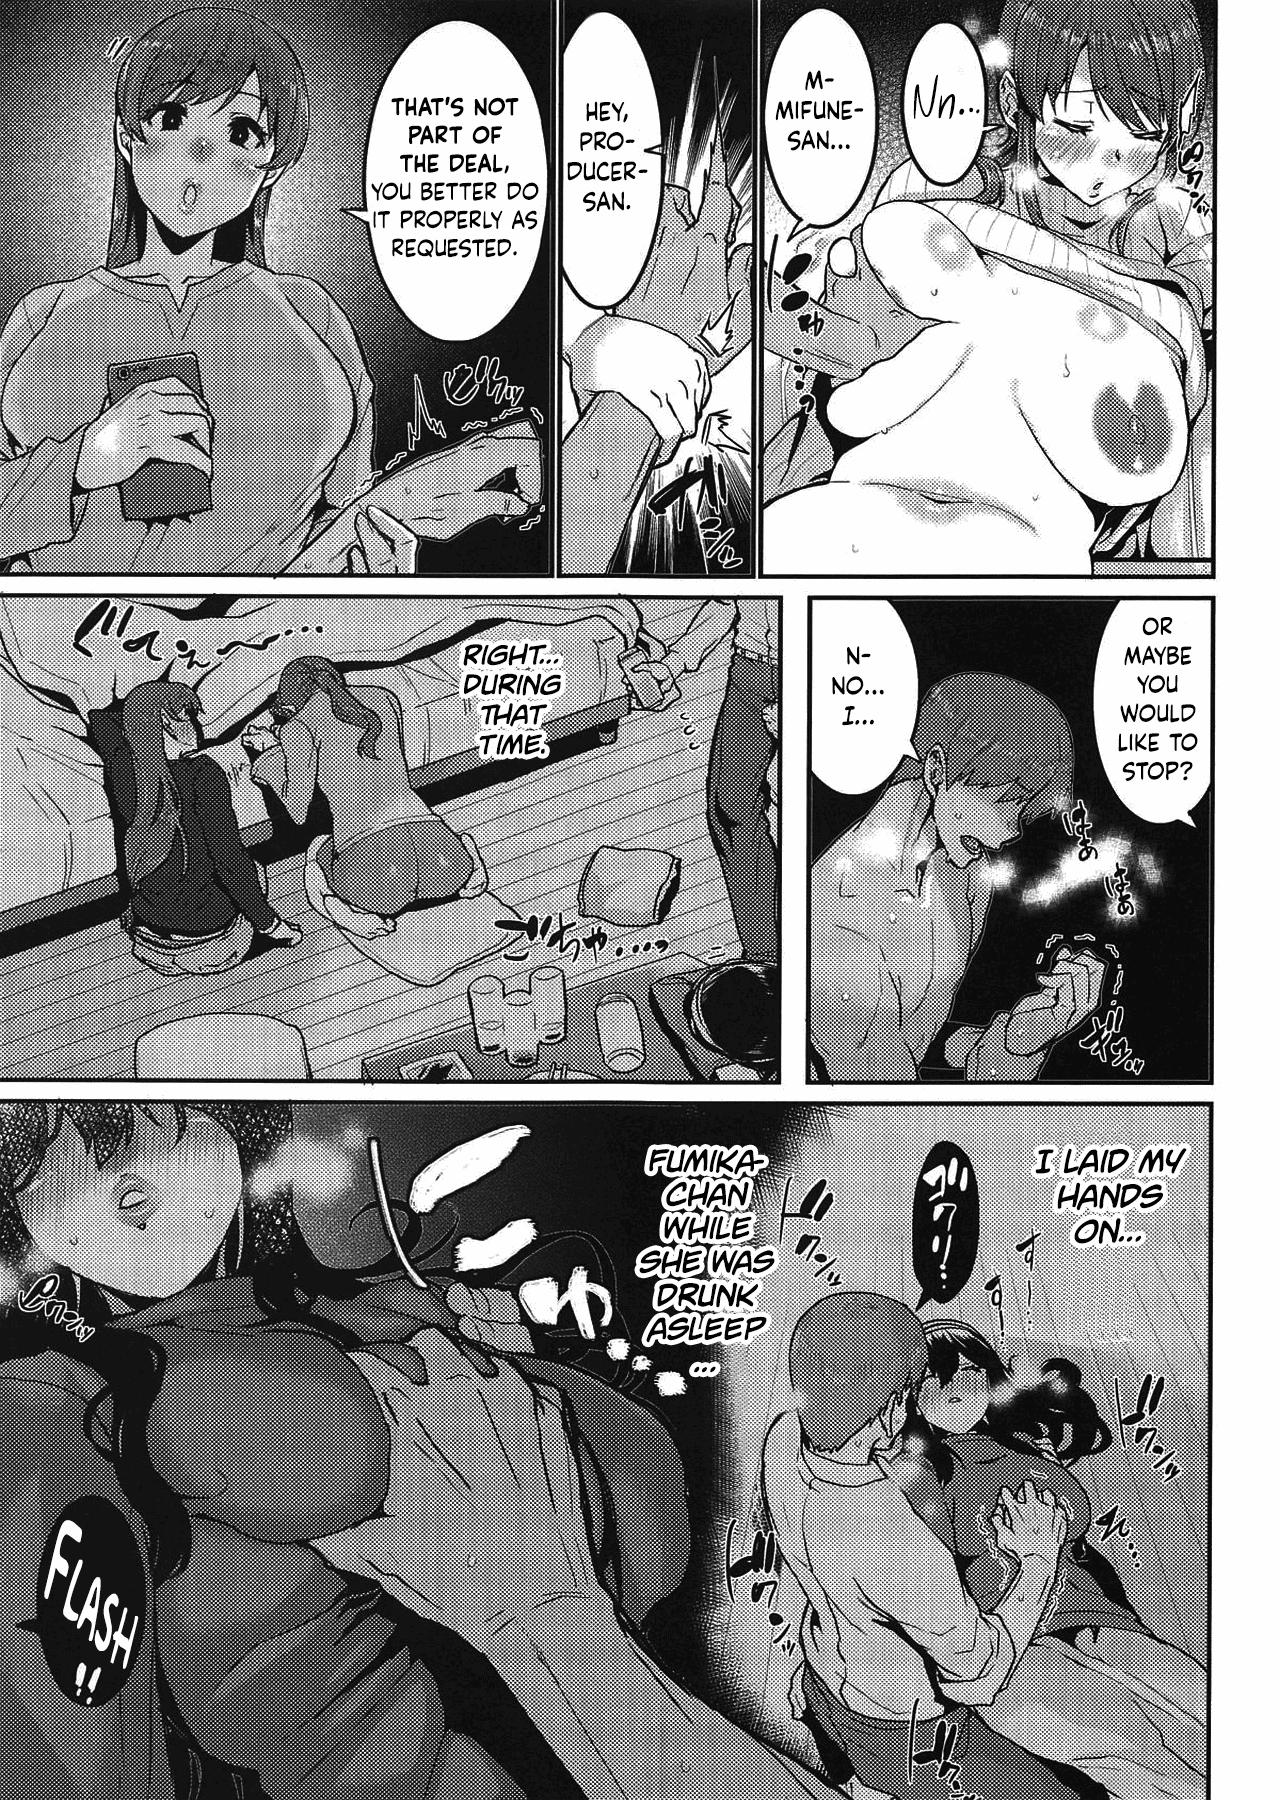 Cumload Minna wa Yoitai. - Everybody wants to get drunk - The idolmaster Fitness - Page 8